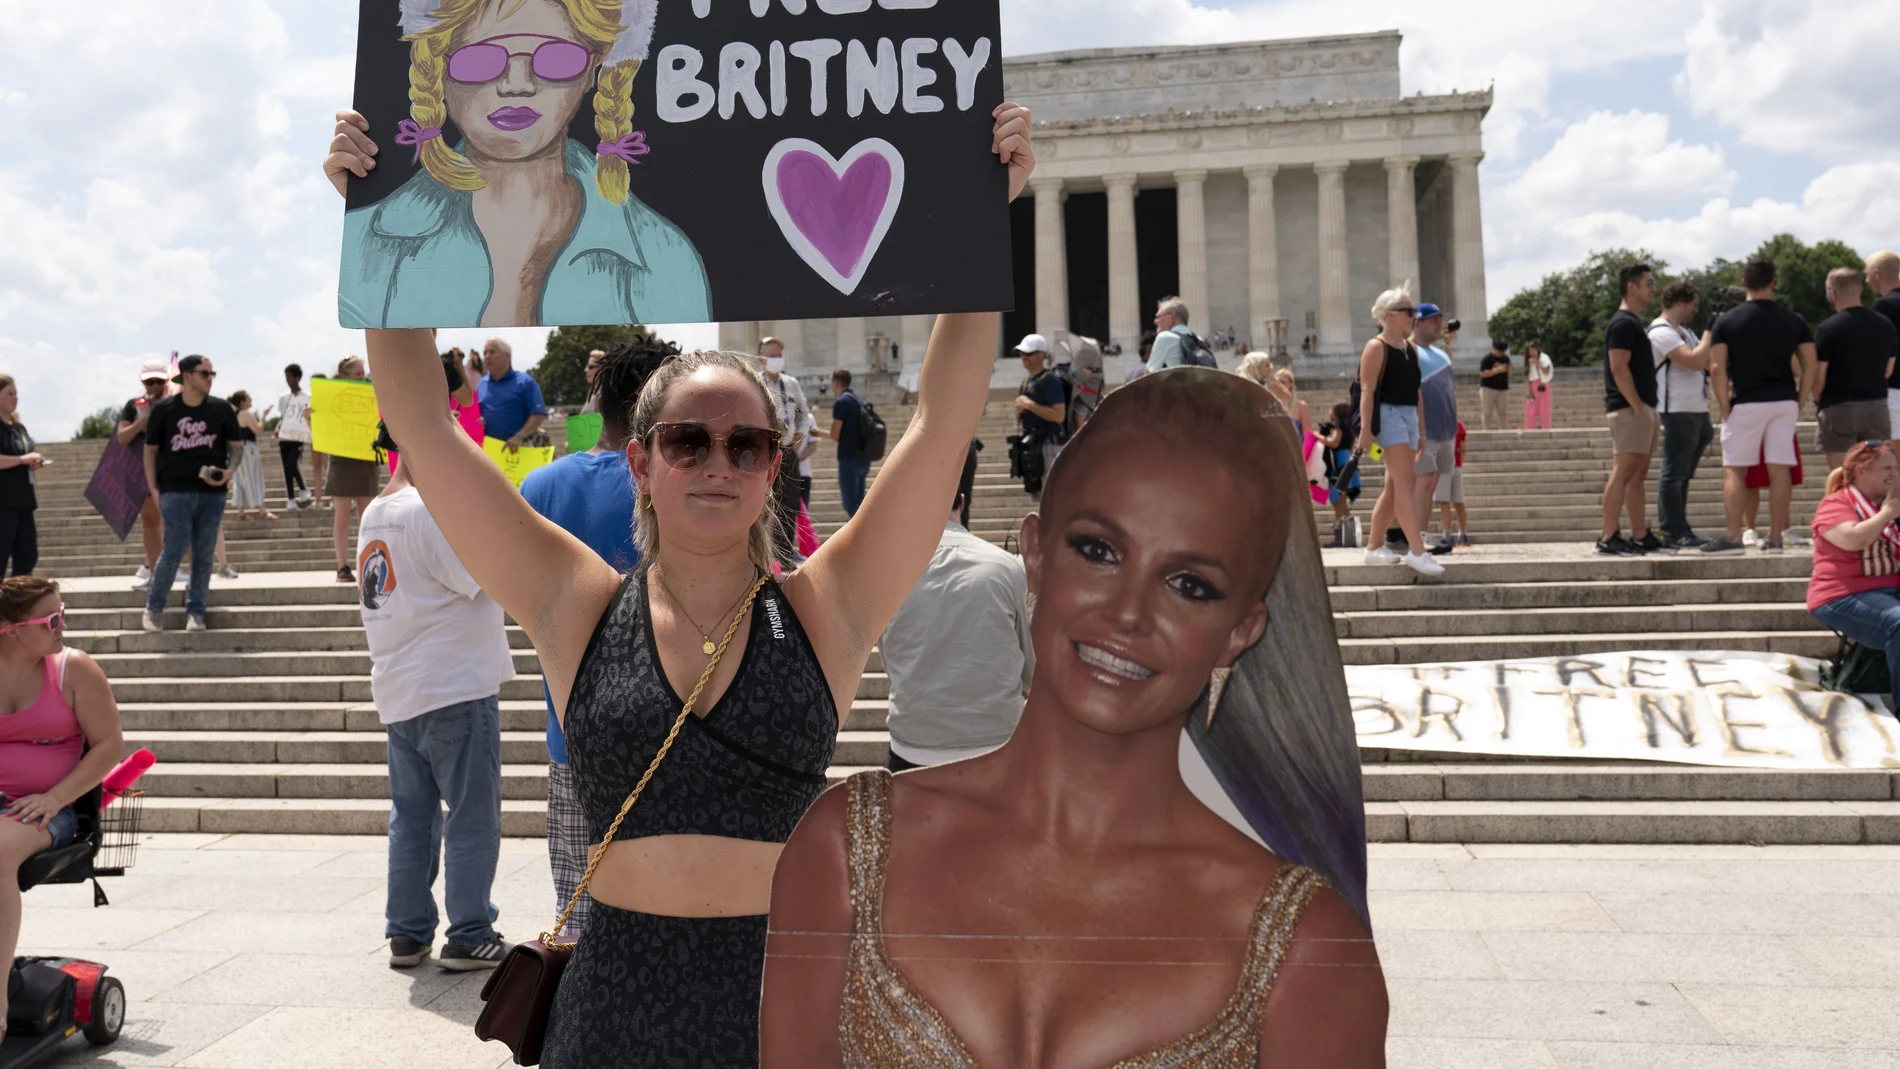 Maggie Howell supporter of pop star Britney Spears protests next to a Britney Spears cardboard cutout at the Lincoln Memorial, during the "Free Britney" rally, Wednesdays, July 14, 2021, in Washington. Rallies have been taking place across the country since the pop star spoke out against her conservatorship in court last month. (AP Photo/Jose Luis Magana)